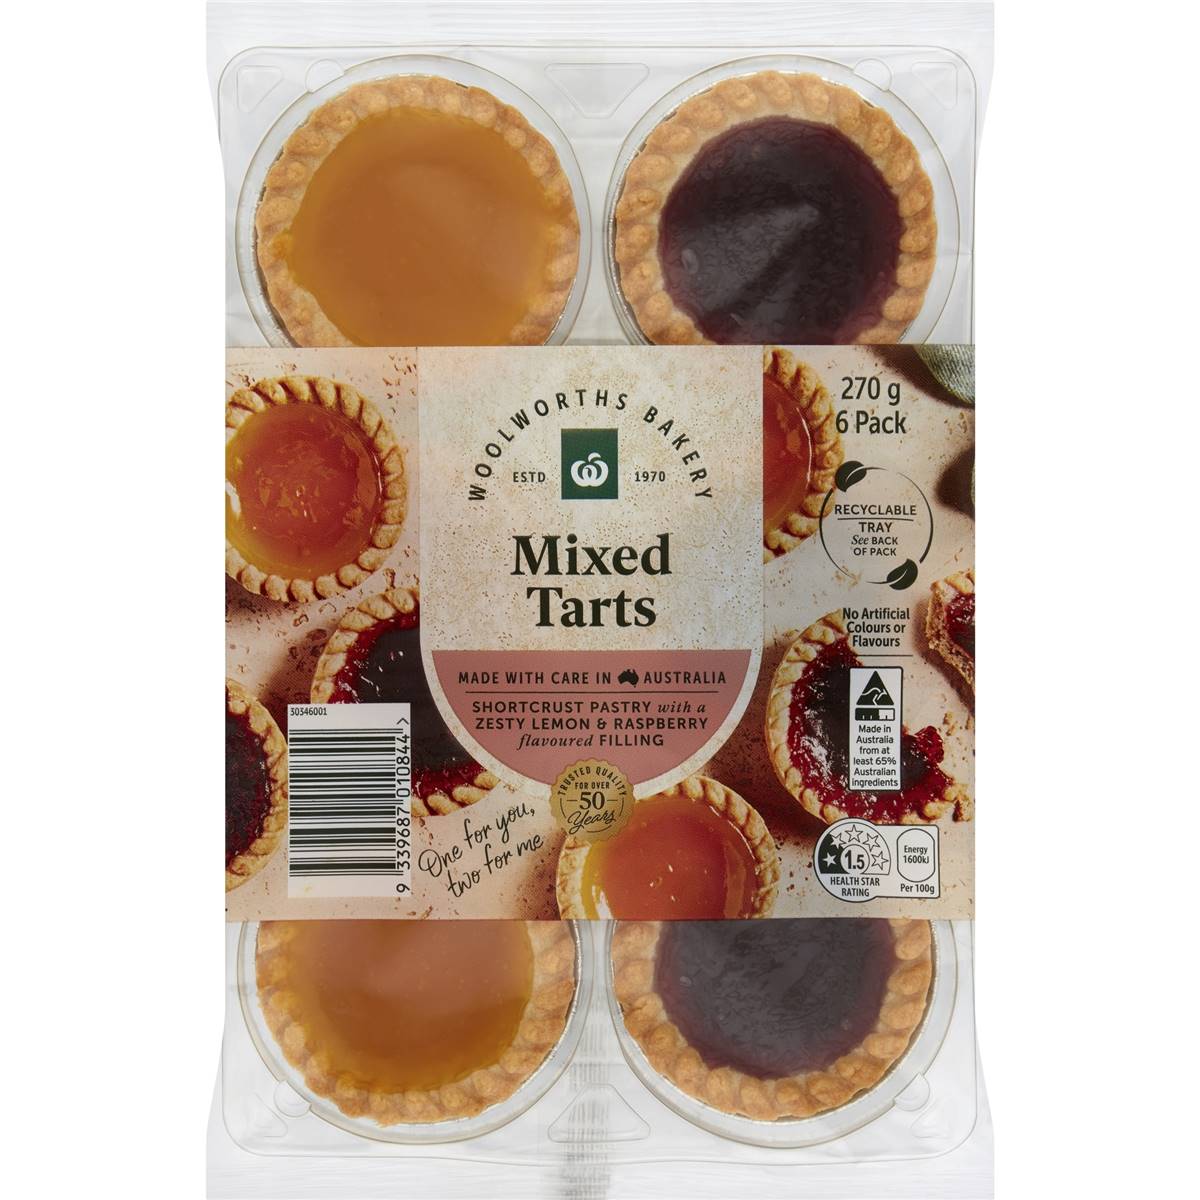 Calories in Woolworths Mixed Tarts